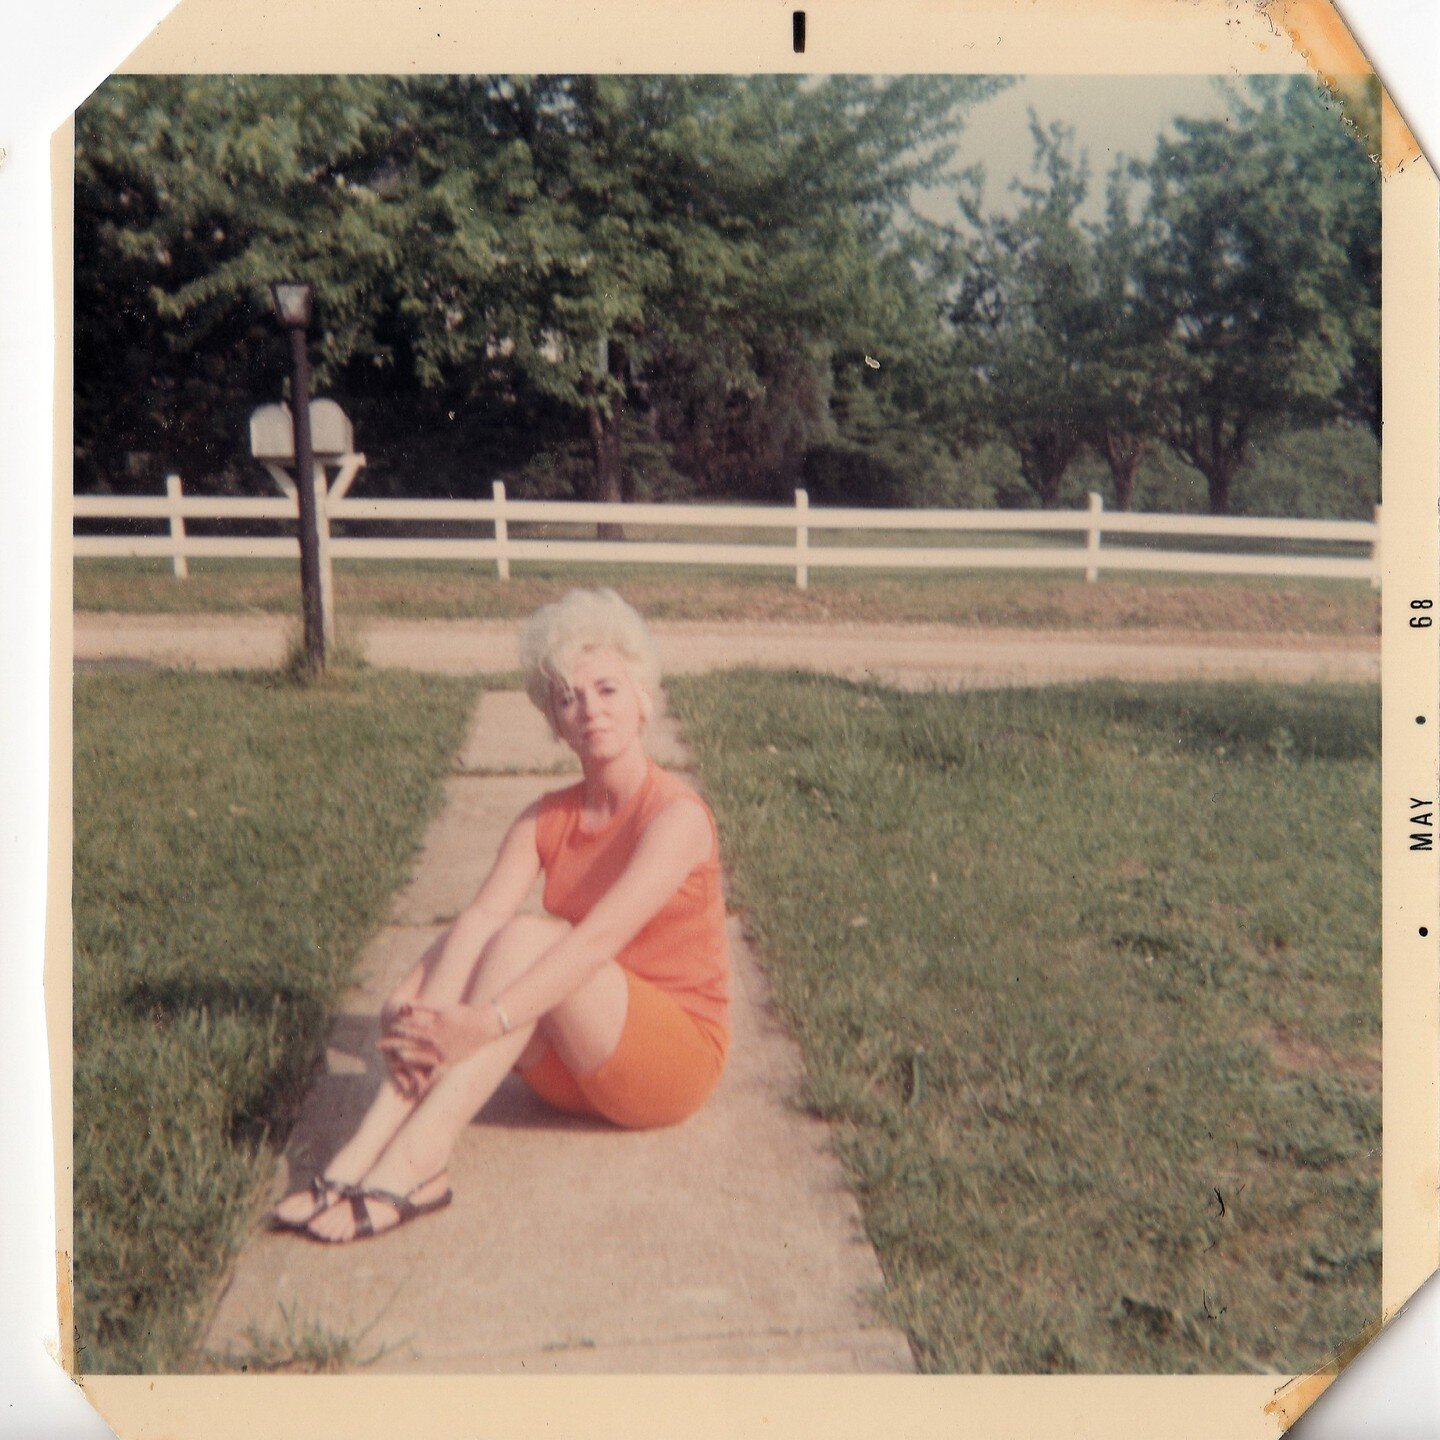 My grandmother was quite the fashionista, especially in the 60s &amp; 70s. 

She passed away this Monday, after a long, wild life that took her from the Great Depression into the new millennium. 

It's a complicated time for me and my family, but I'm